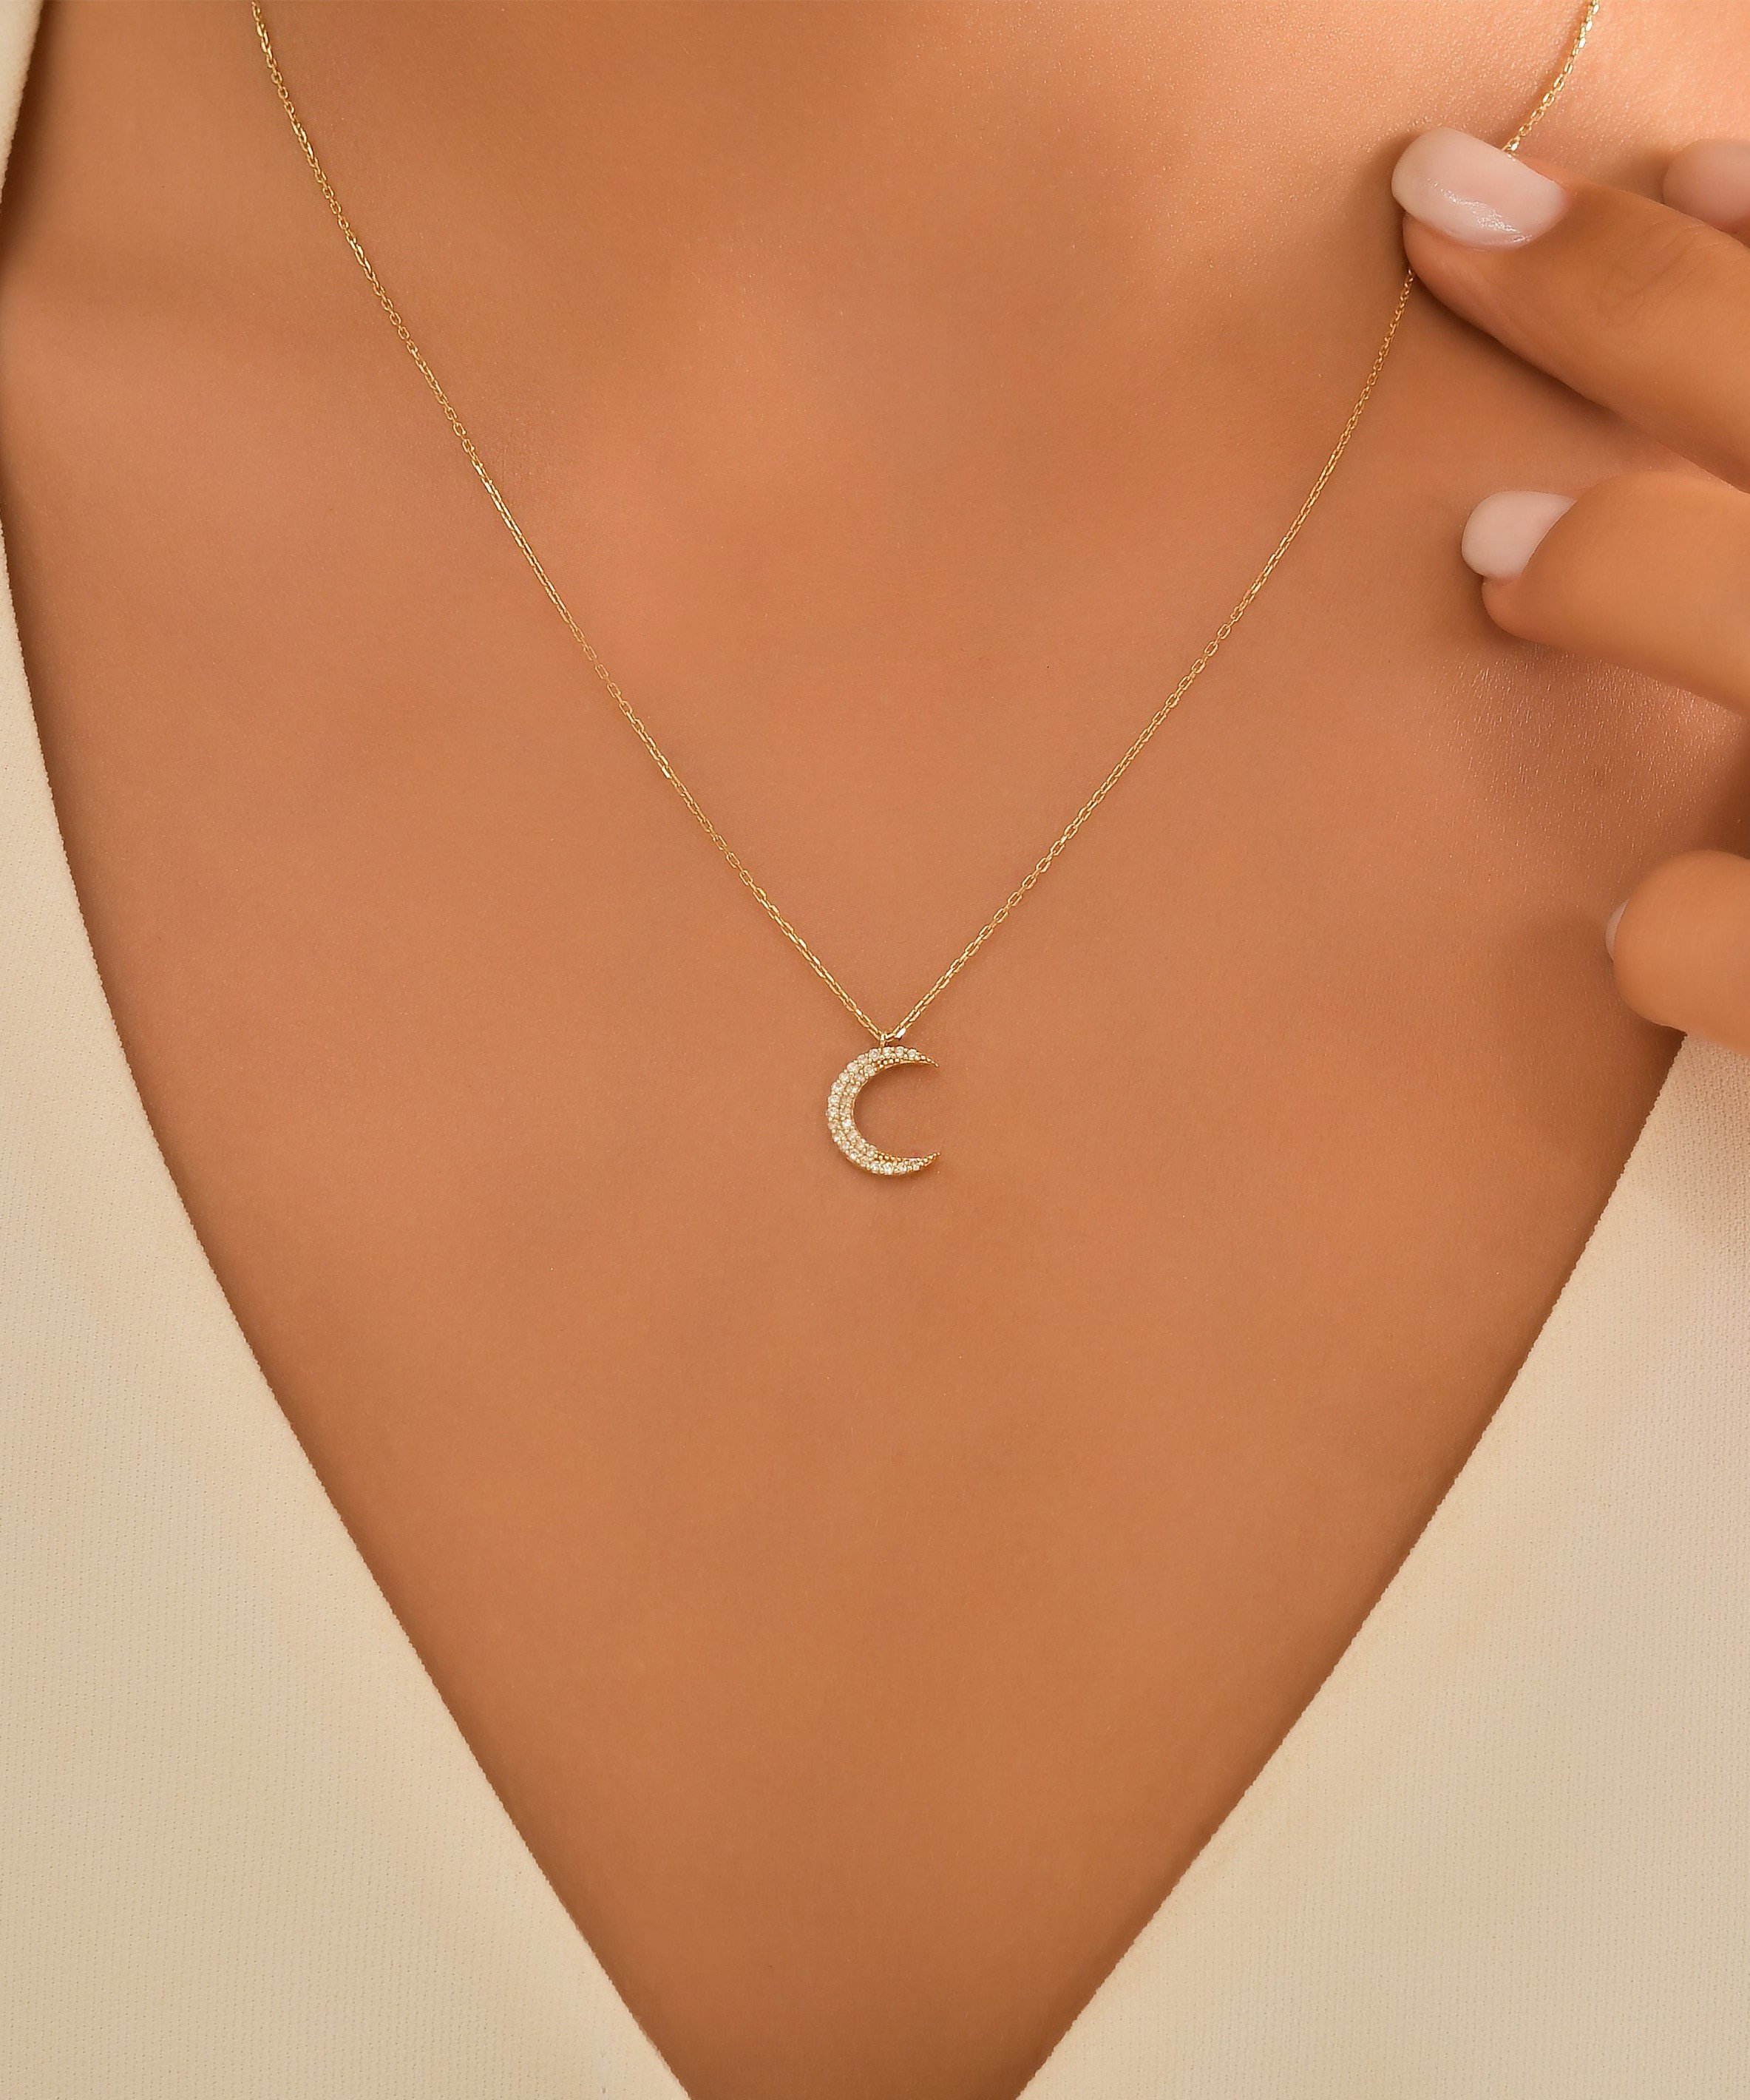 Rose Gold Crescent Moon Necklace Black Diamond Necklace  Prime Birthday Gift For Women Gift for Her Celestial Jewelry ZCMN 